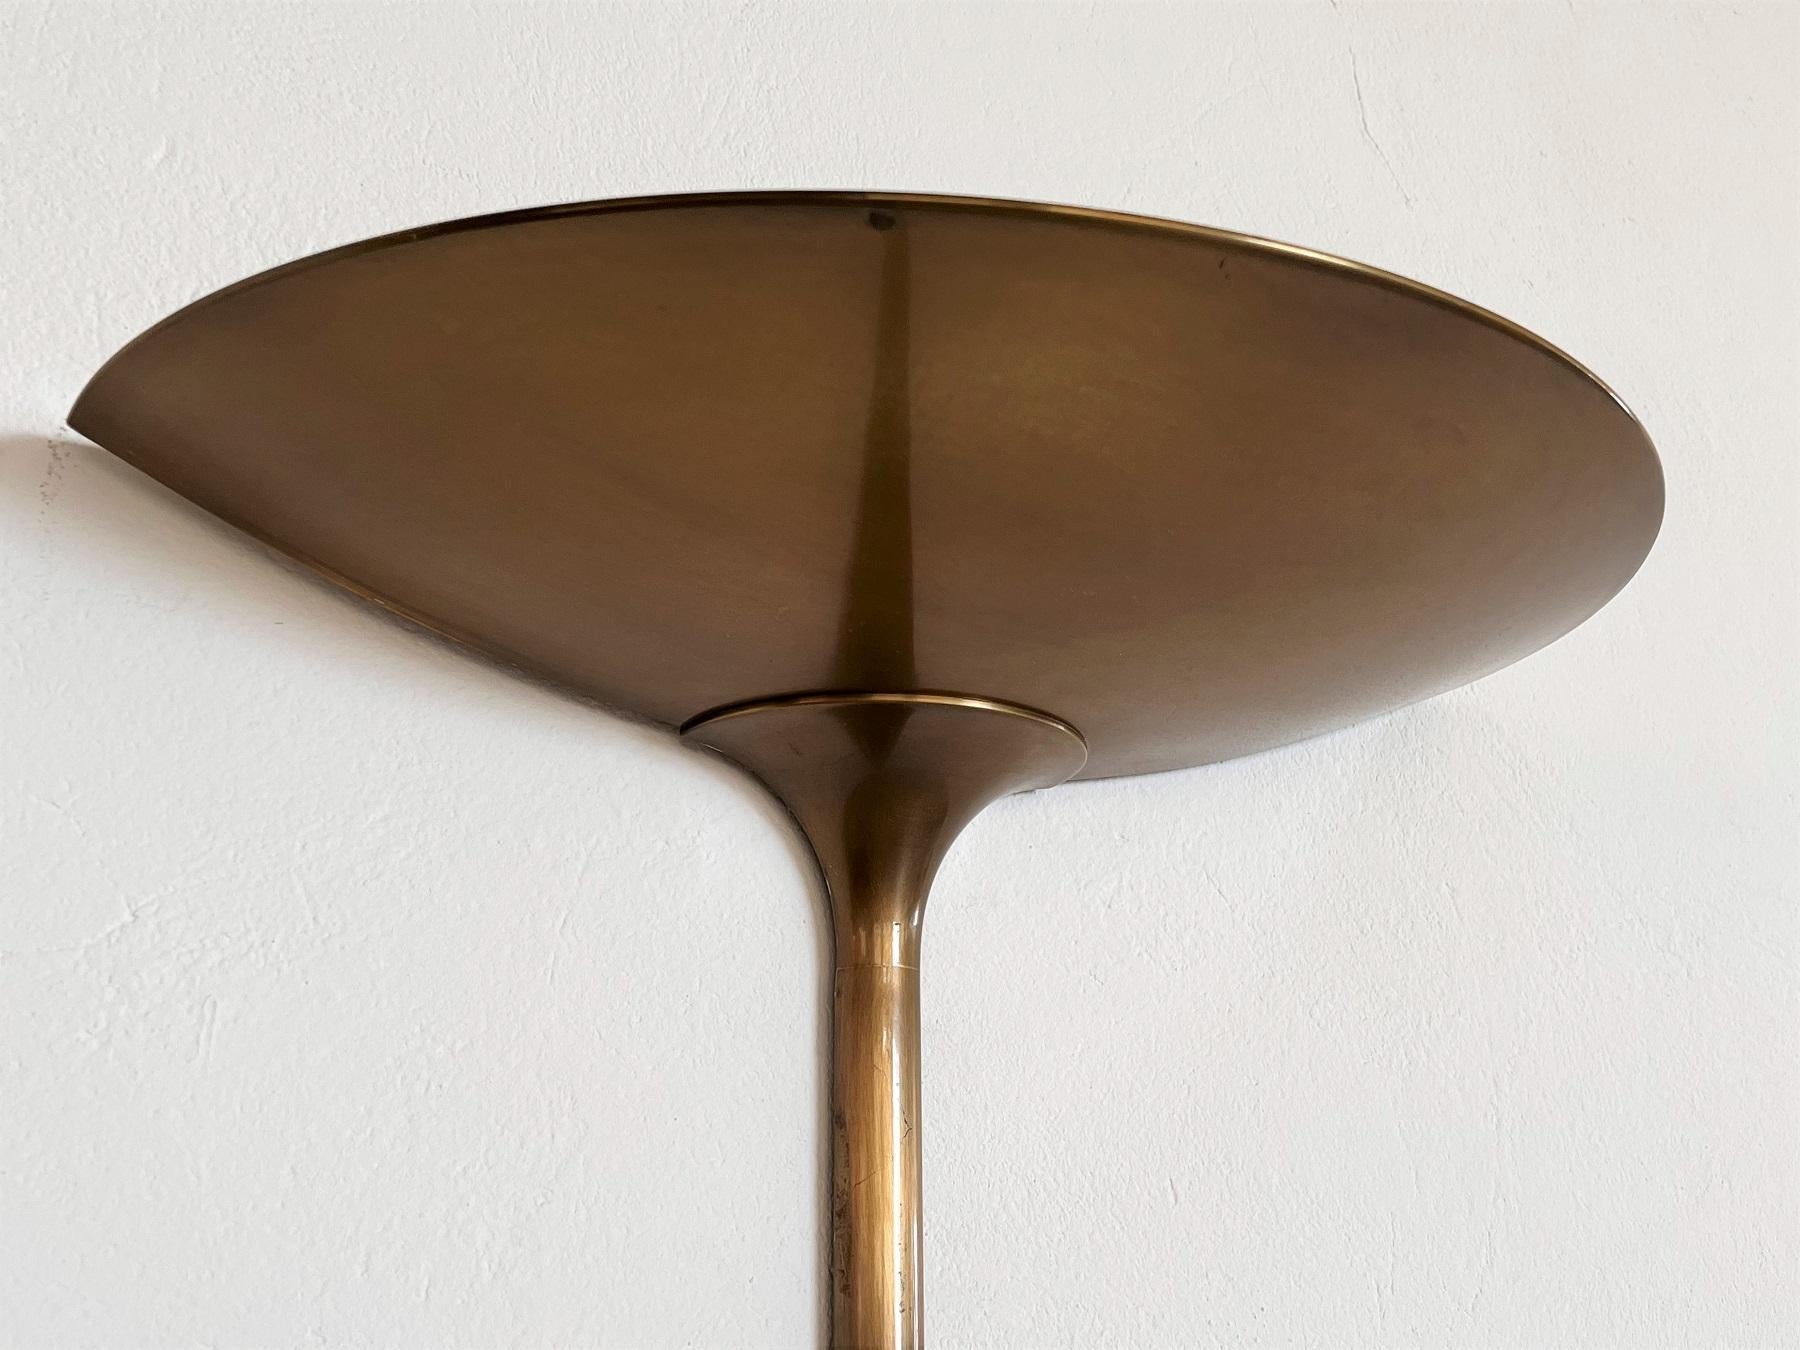 Late 20th Century Florian Schulz Vintage Wall Sconce in Brushed Brass, 1970s For Sale